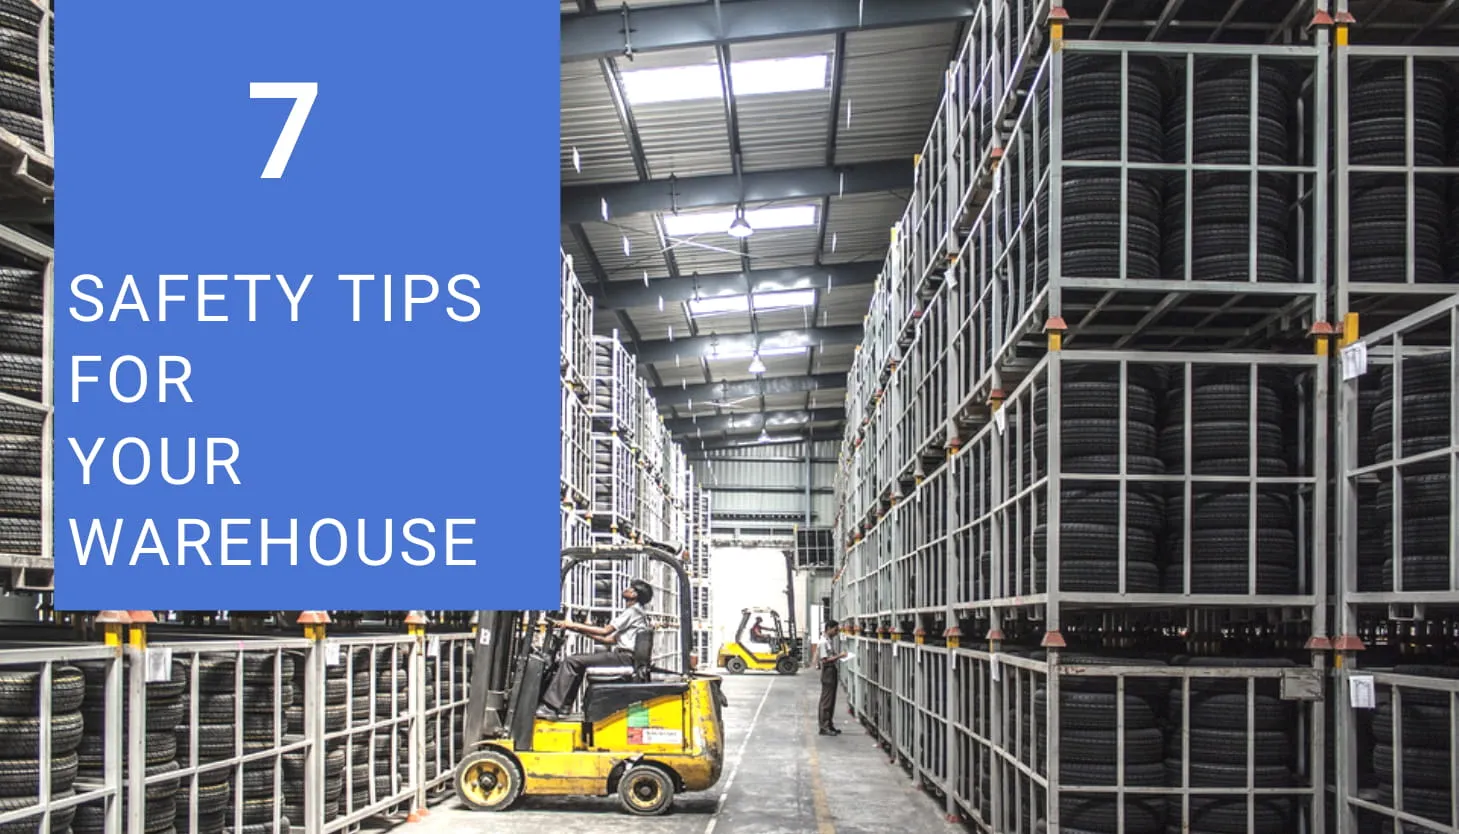 Safety tips for warehouse